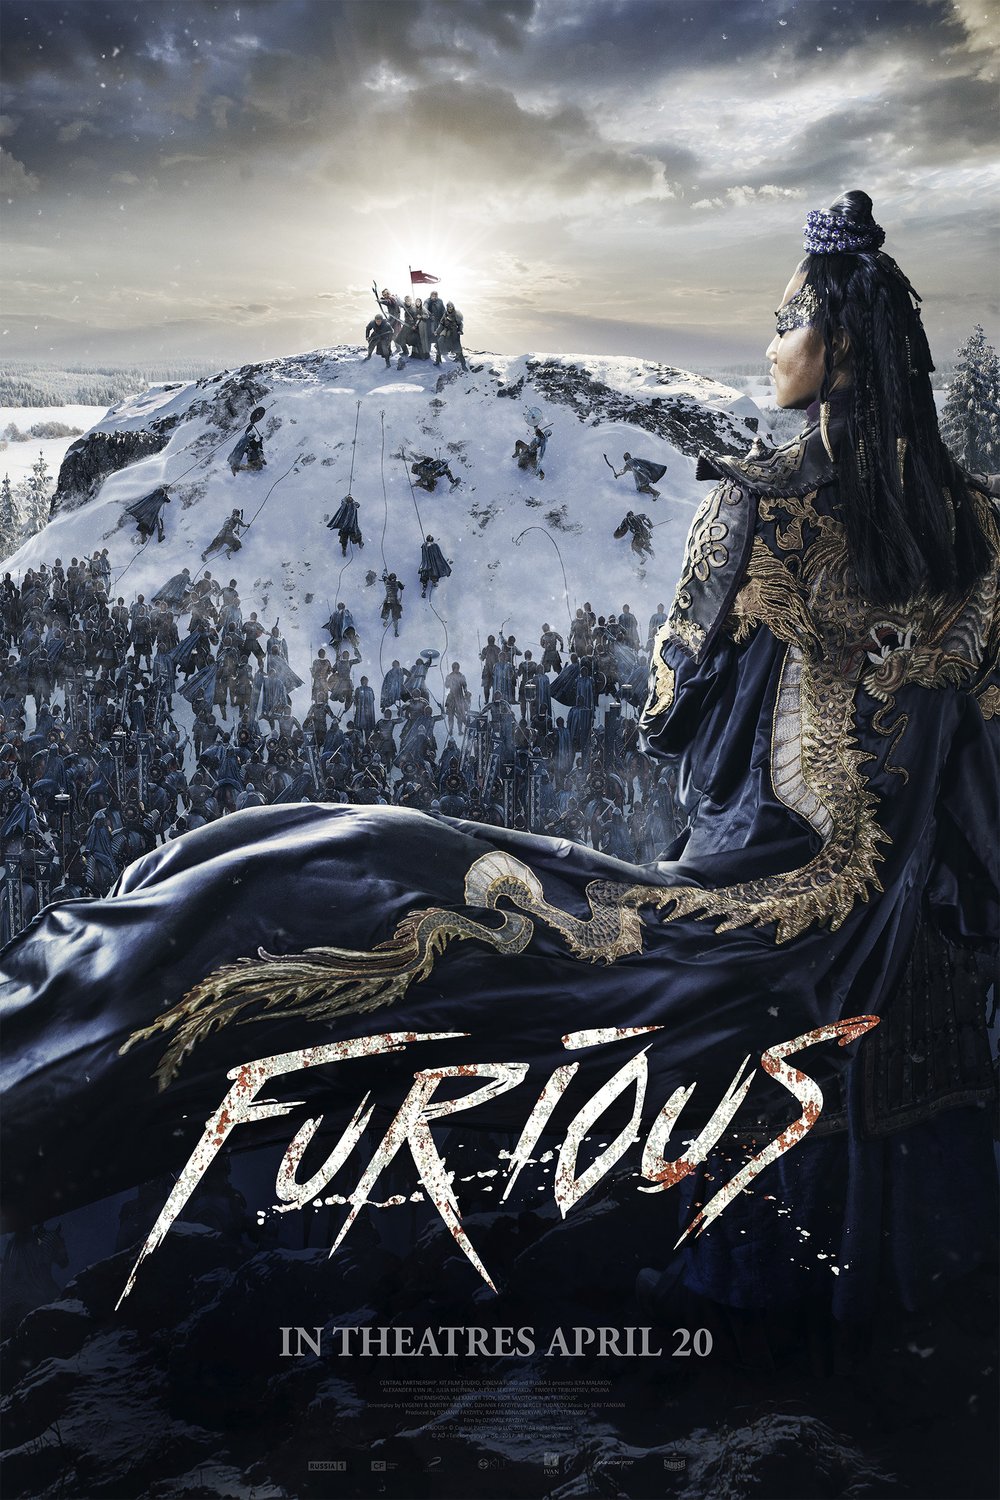 Poster of the movie Furious